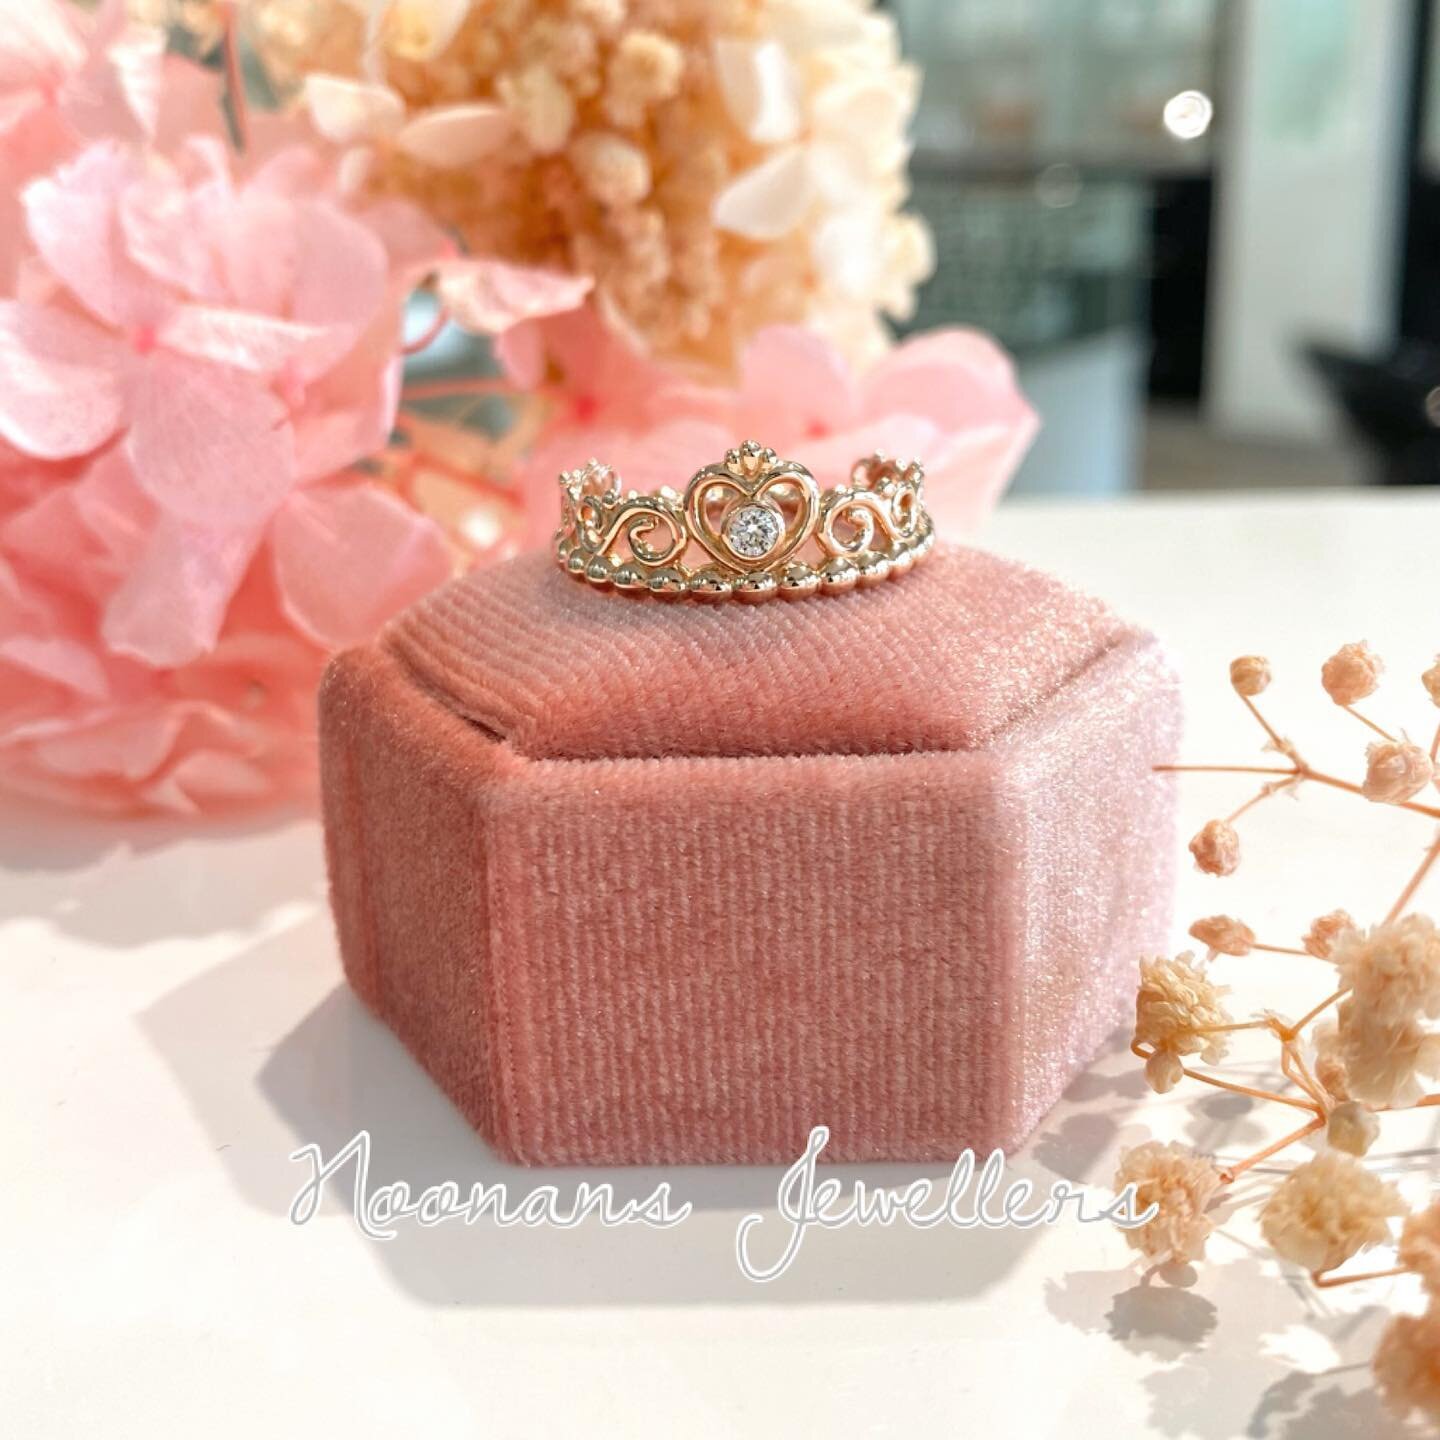 Elevate your everyday look with some stunning Pandora Rose! 🌸💖

&bull;
#jewelry #jewellery #australianjeweller #smallbusiness #australiansmallbusiness #shopsmall #shoplocal #pandora #pandoraring #pandorarose #rosegold #rosegoldring #fashioninspo #b